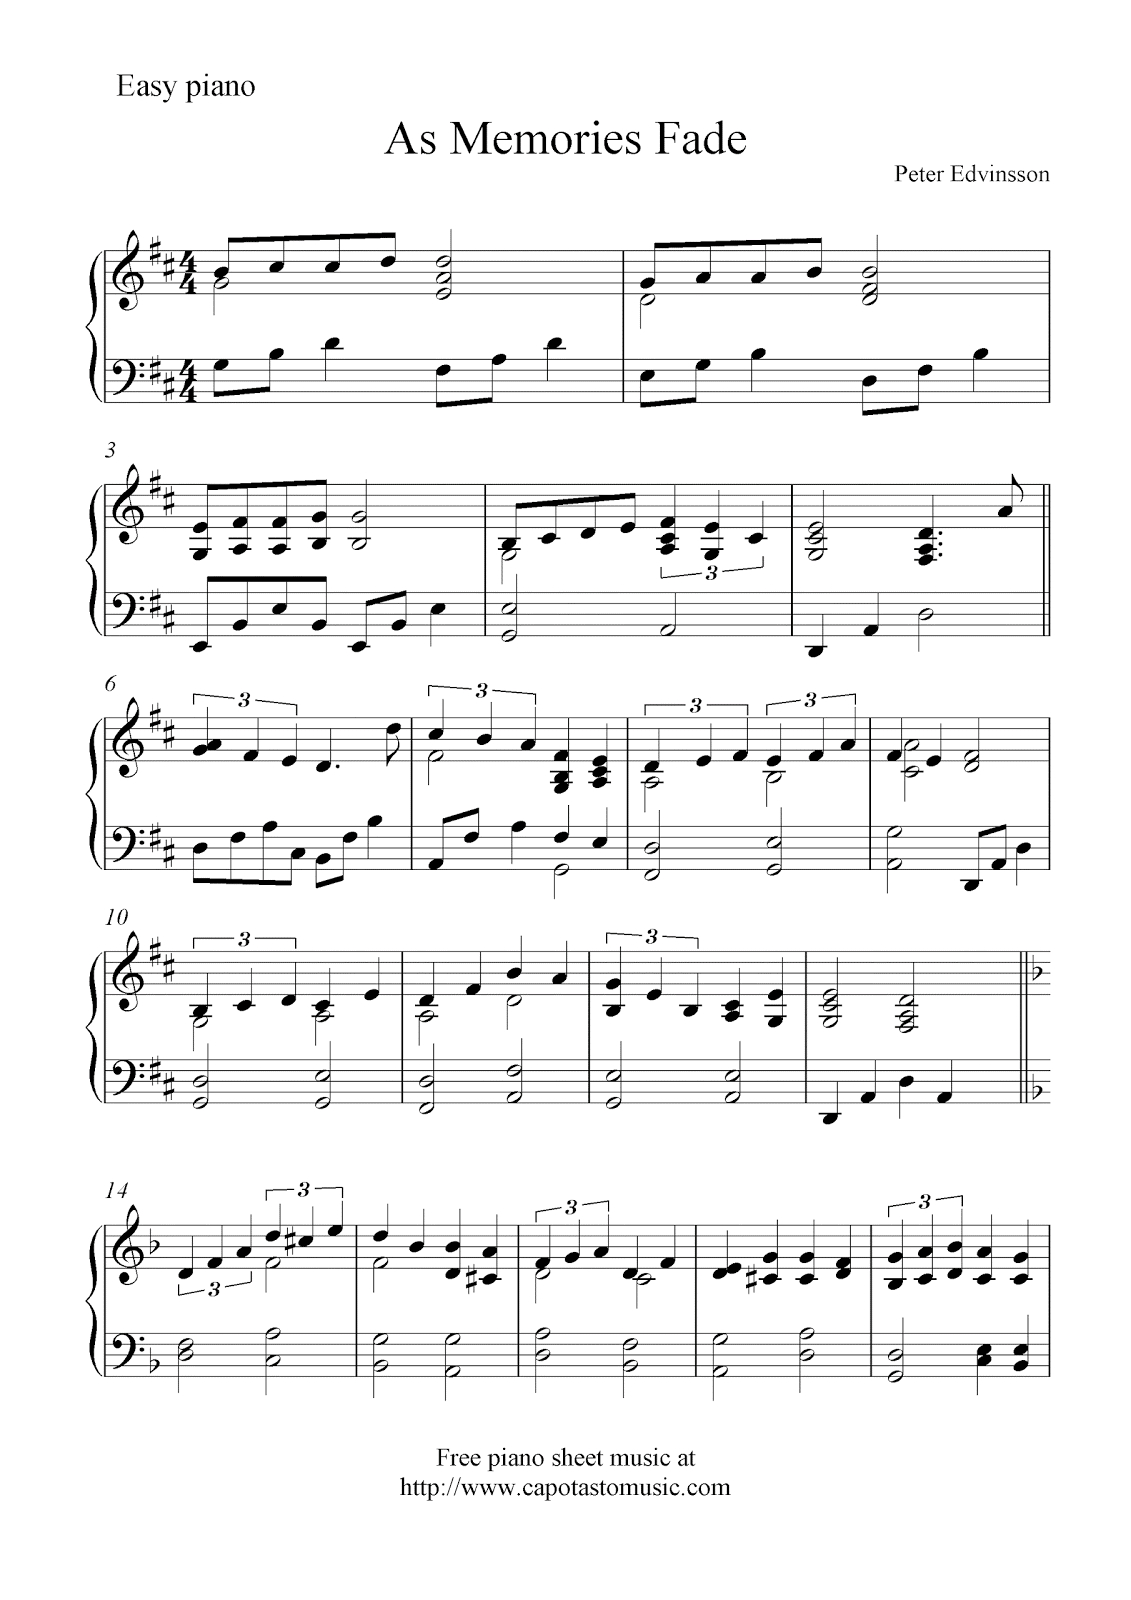 Free Easy Piano Sheet Music, As Memories Fadepeter Edvinsson - Free Printable Classical Sheet Music For Piano